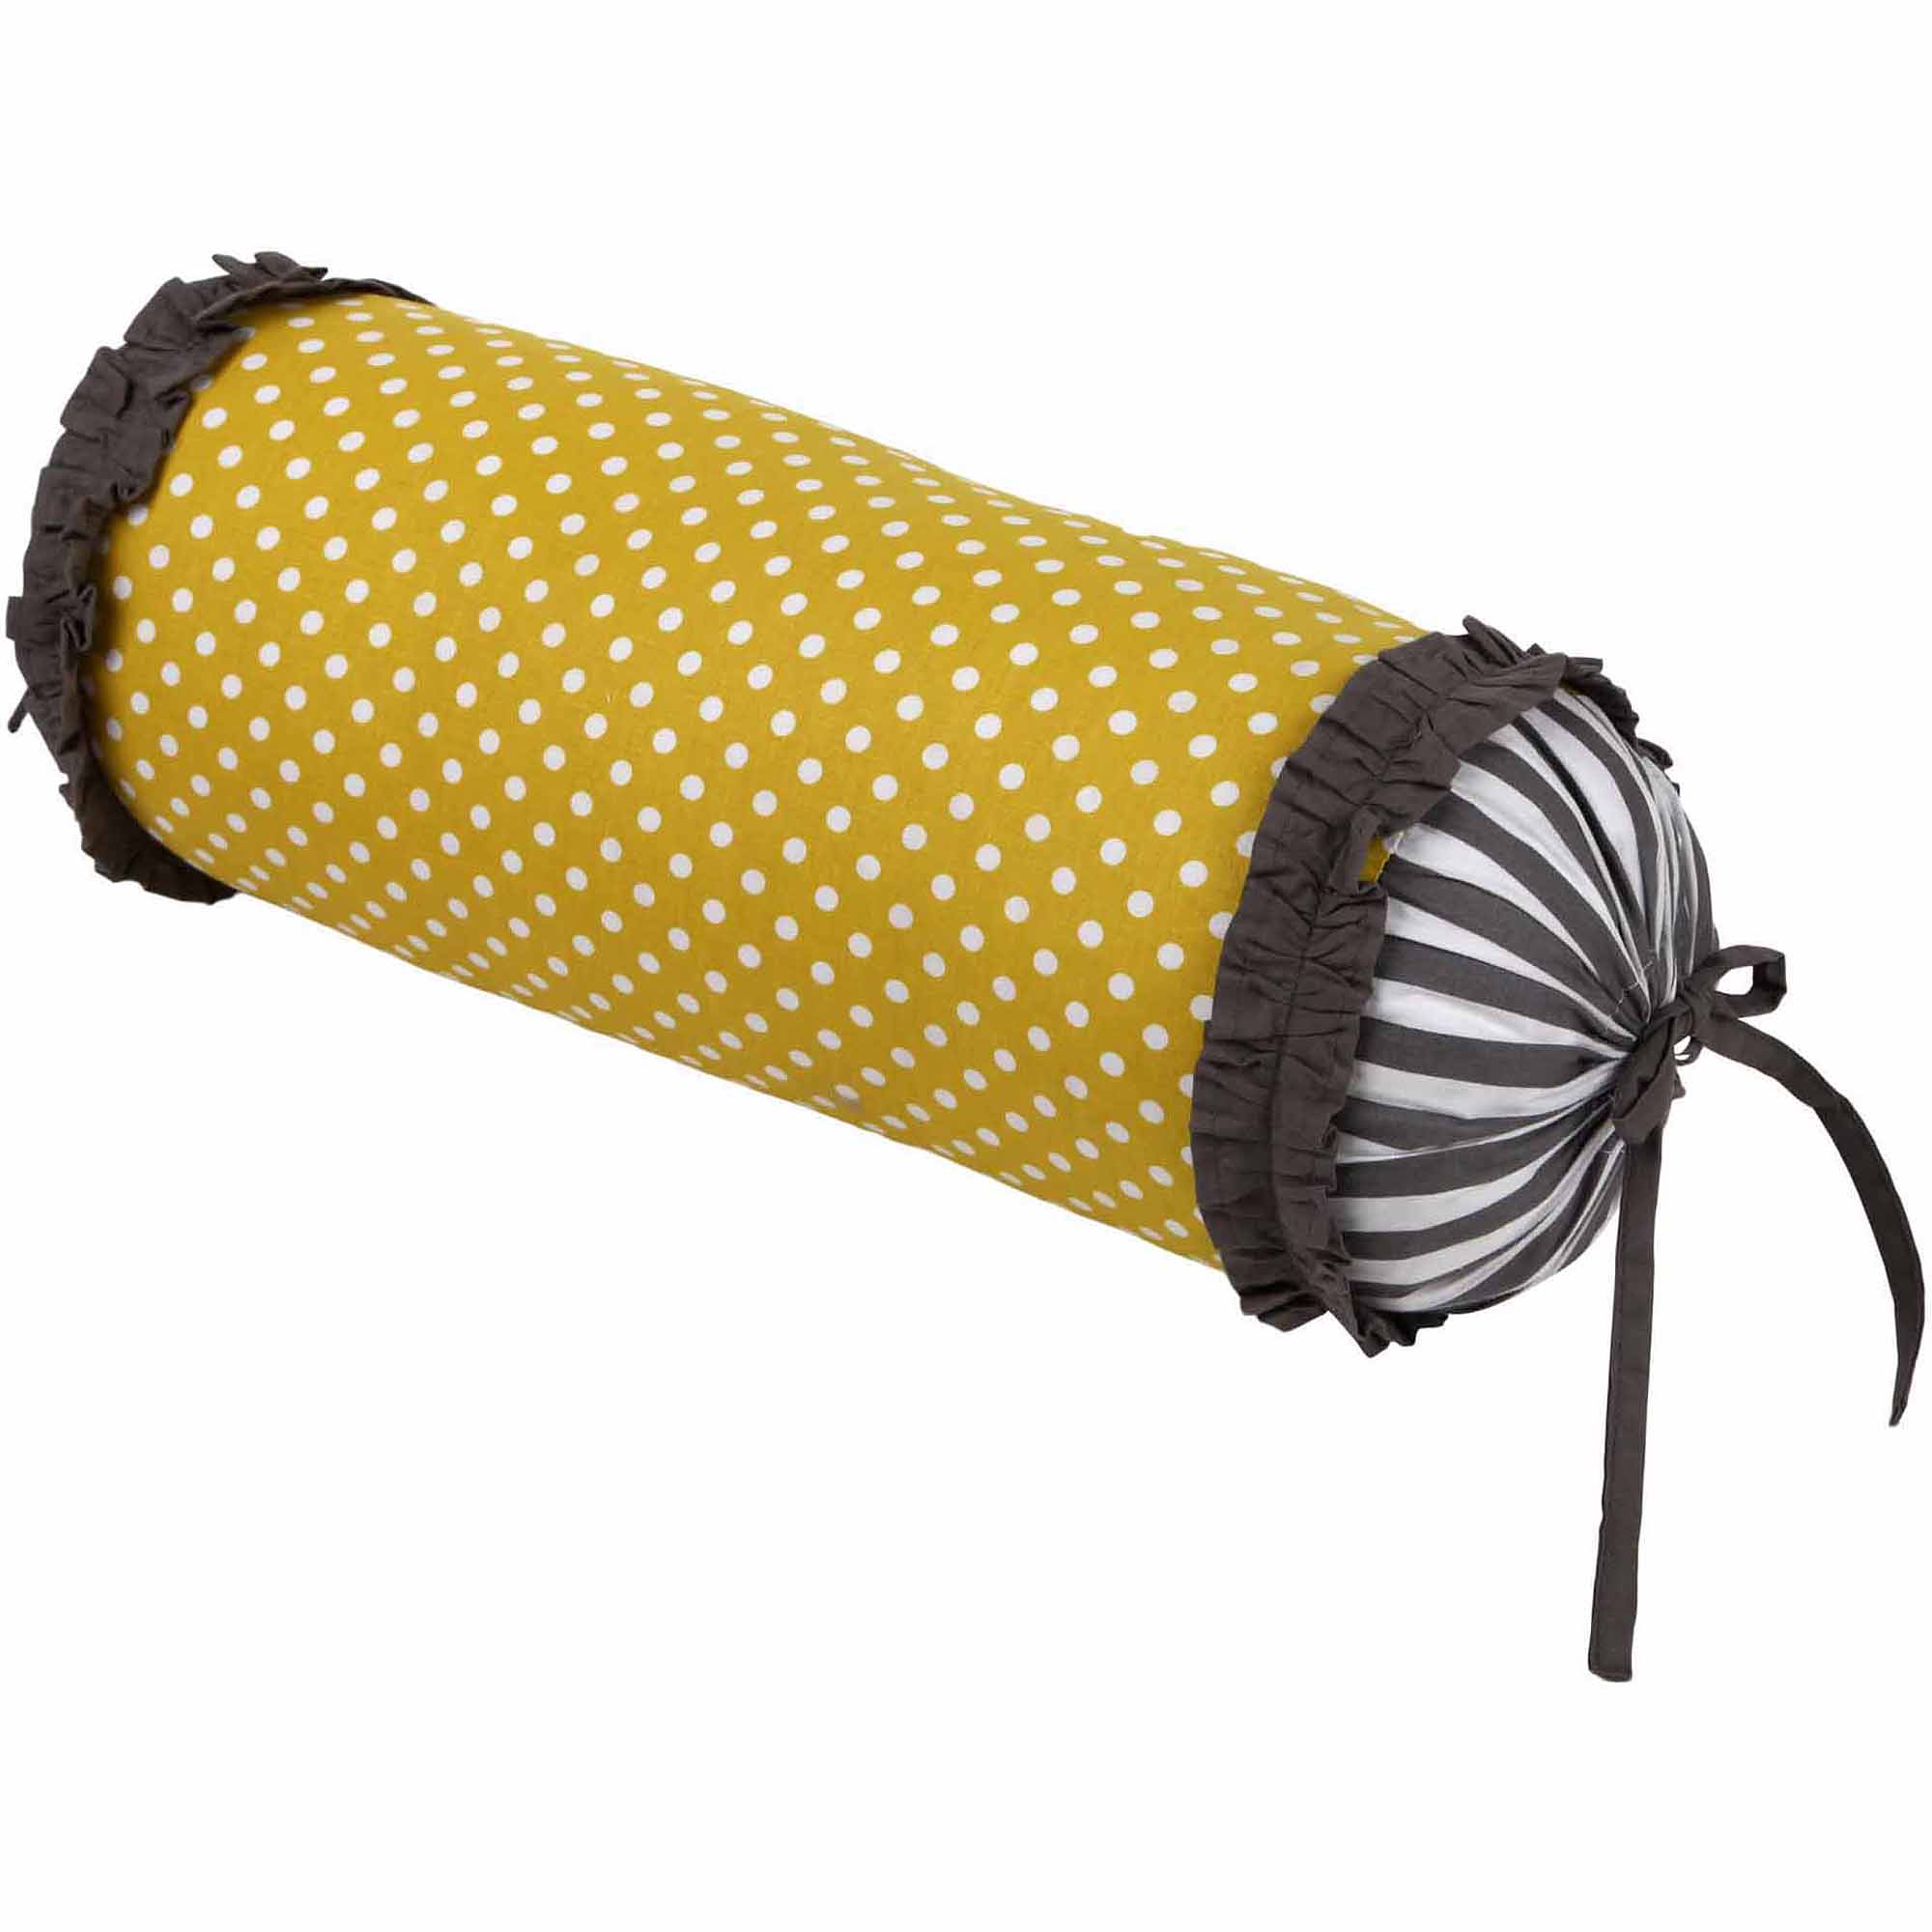 Bacati - Dots/Pin Stripes Neckroll with 100% Cotton cover and polyfilled insert Pillow, Gray/Yellow - image 1 of 1